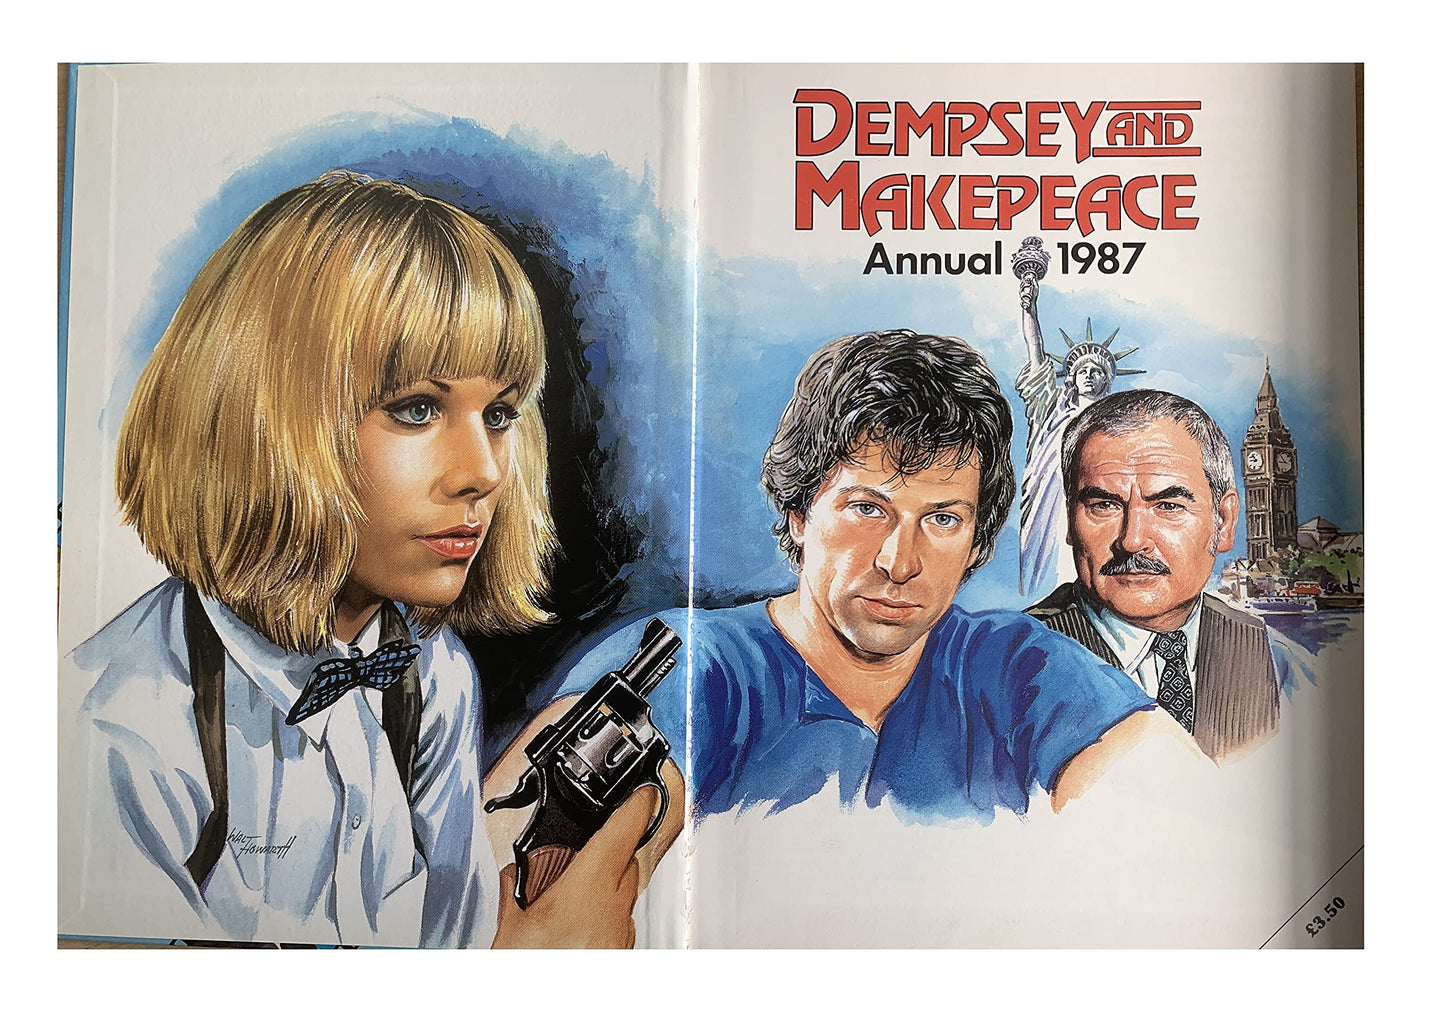 Vintage Dempsey And Makepeace Annual 1987 - Shop Stock Room Find